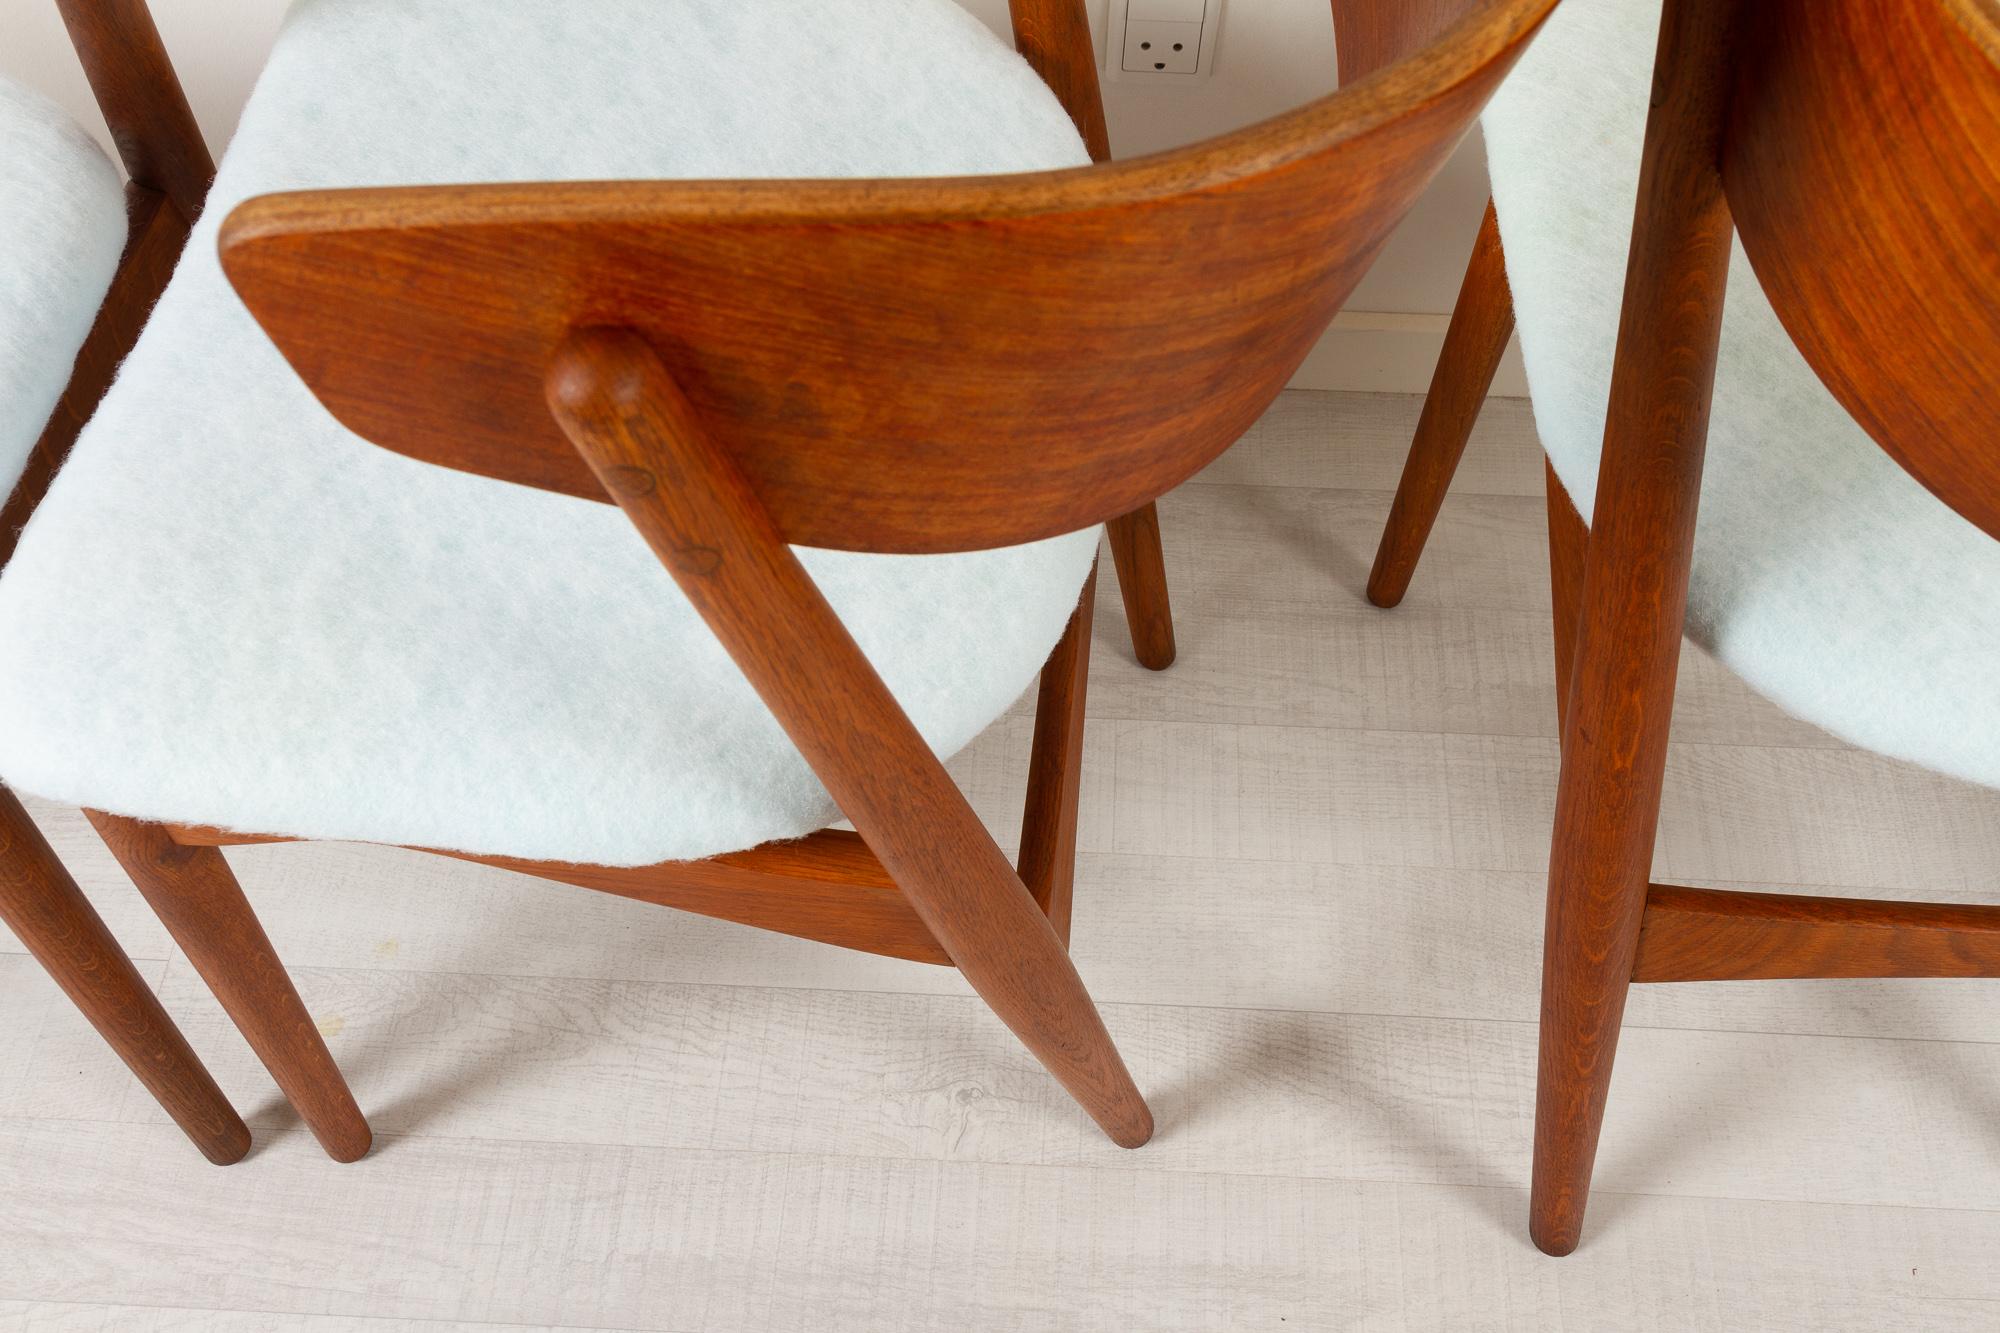 Vintage Danish Teak Dining Chairs No. 7 by Helge Sibast 1960s Set of 4 For Sale 11